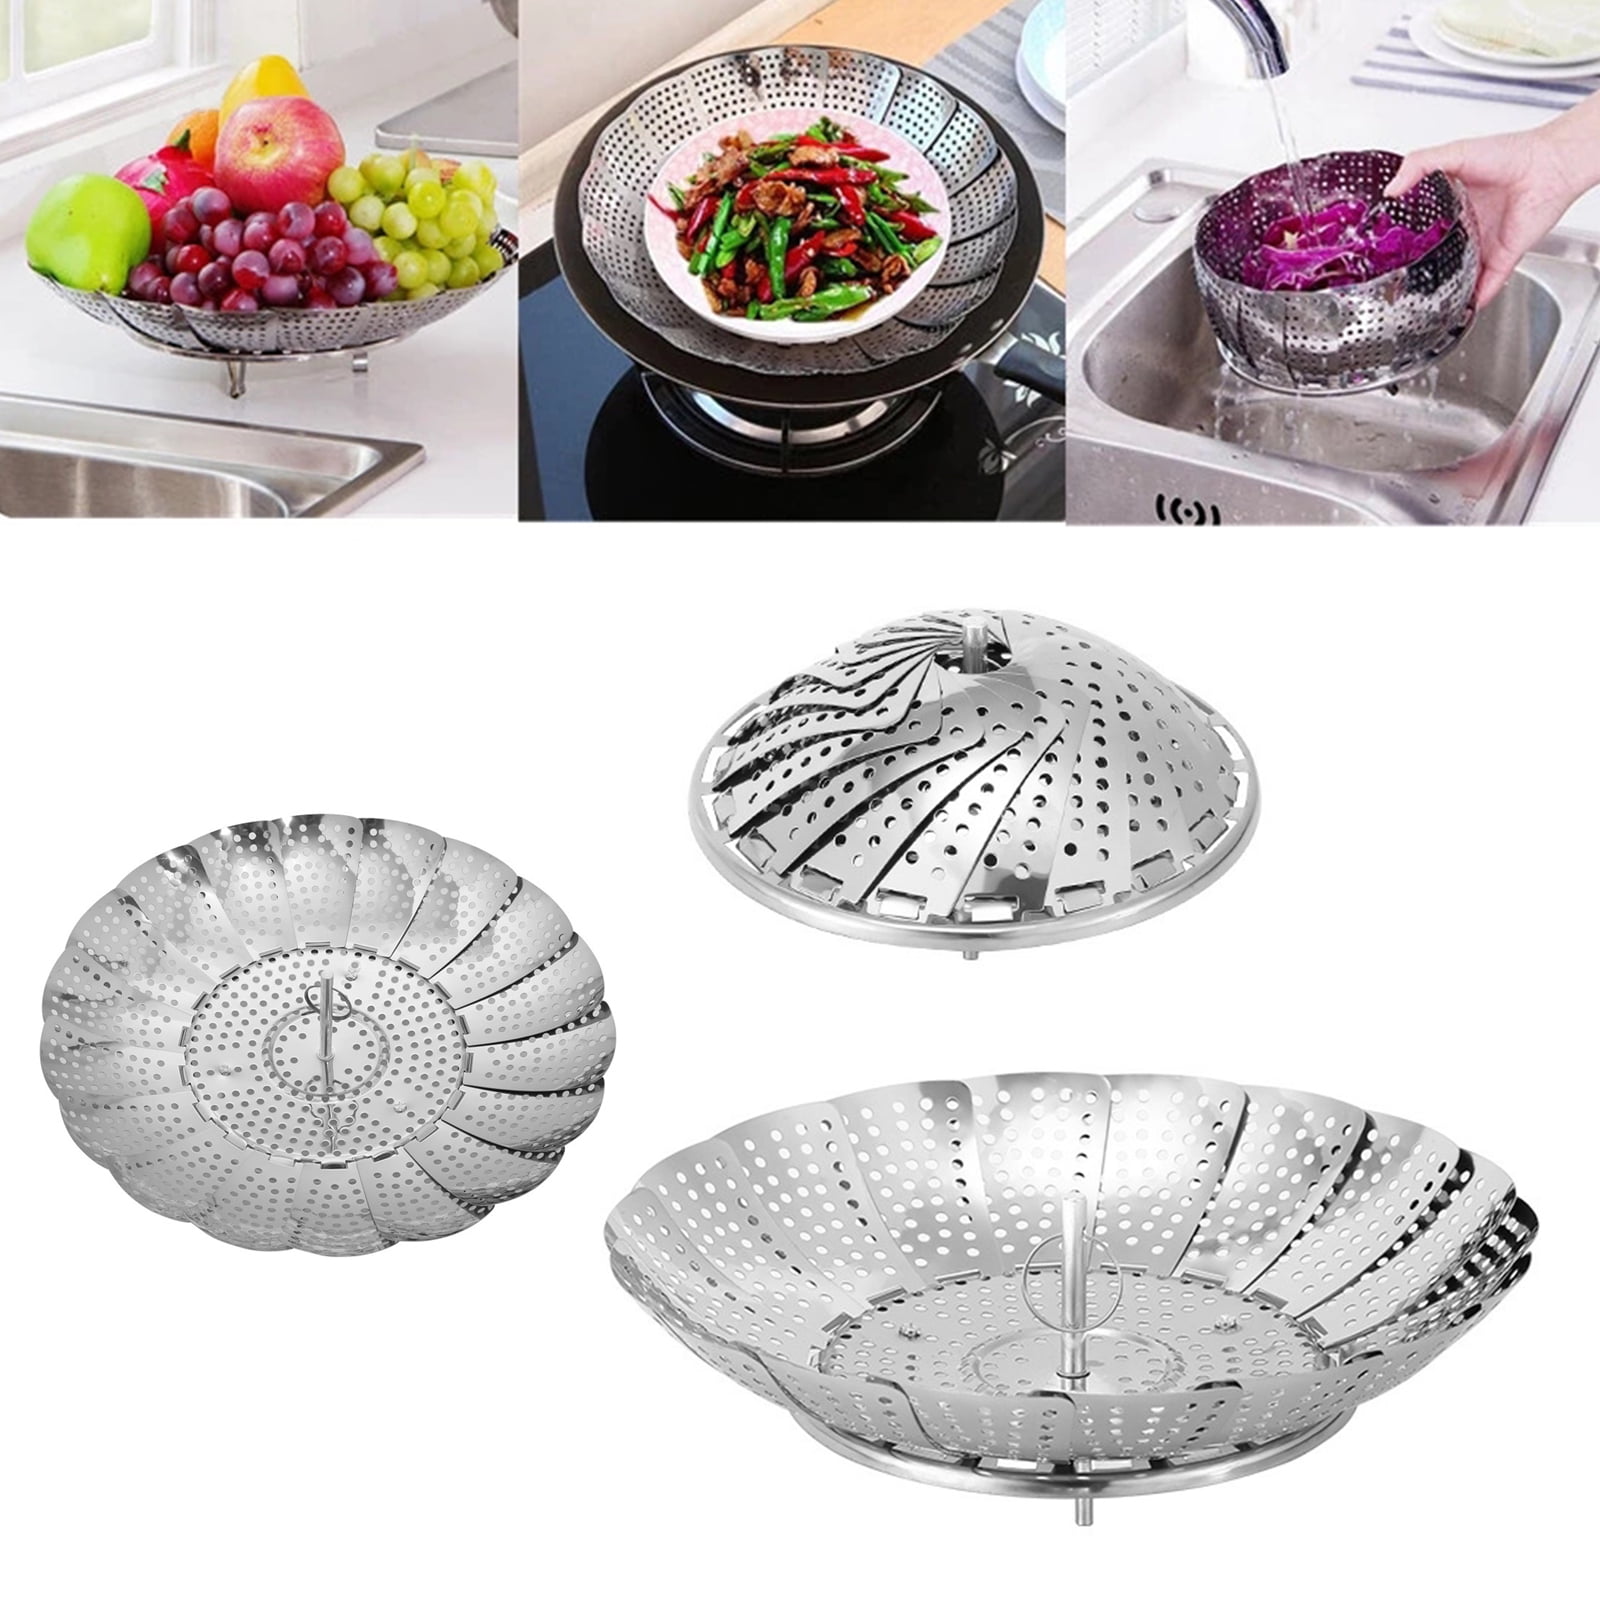 Vegetable Steaming Rack Stainless Steel Folding Food Steamer Net Basket  Steamer Scalable Kitchen Tools Gadgets - AliExpress